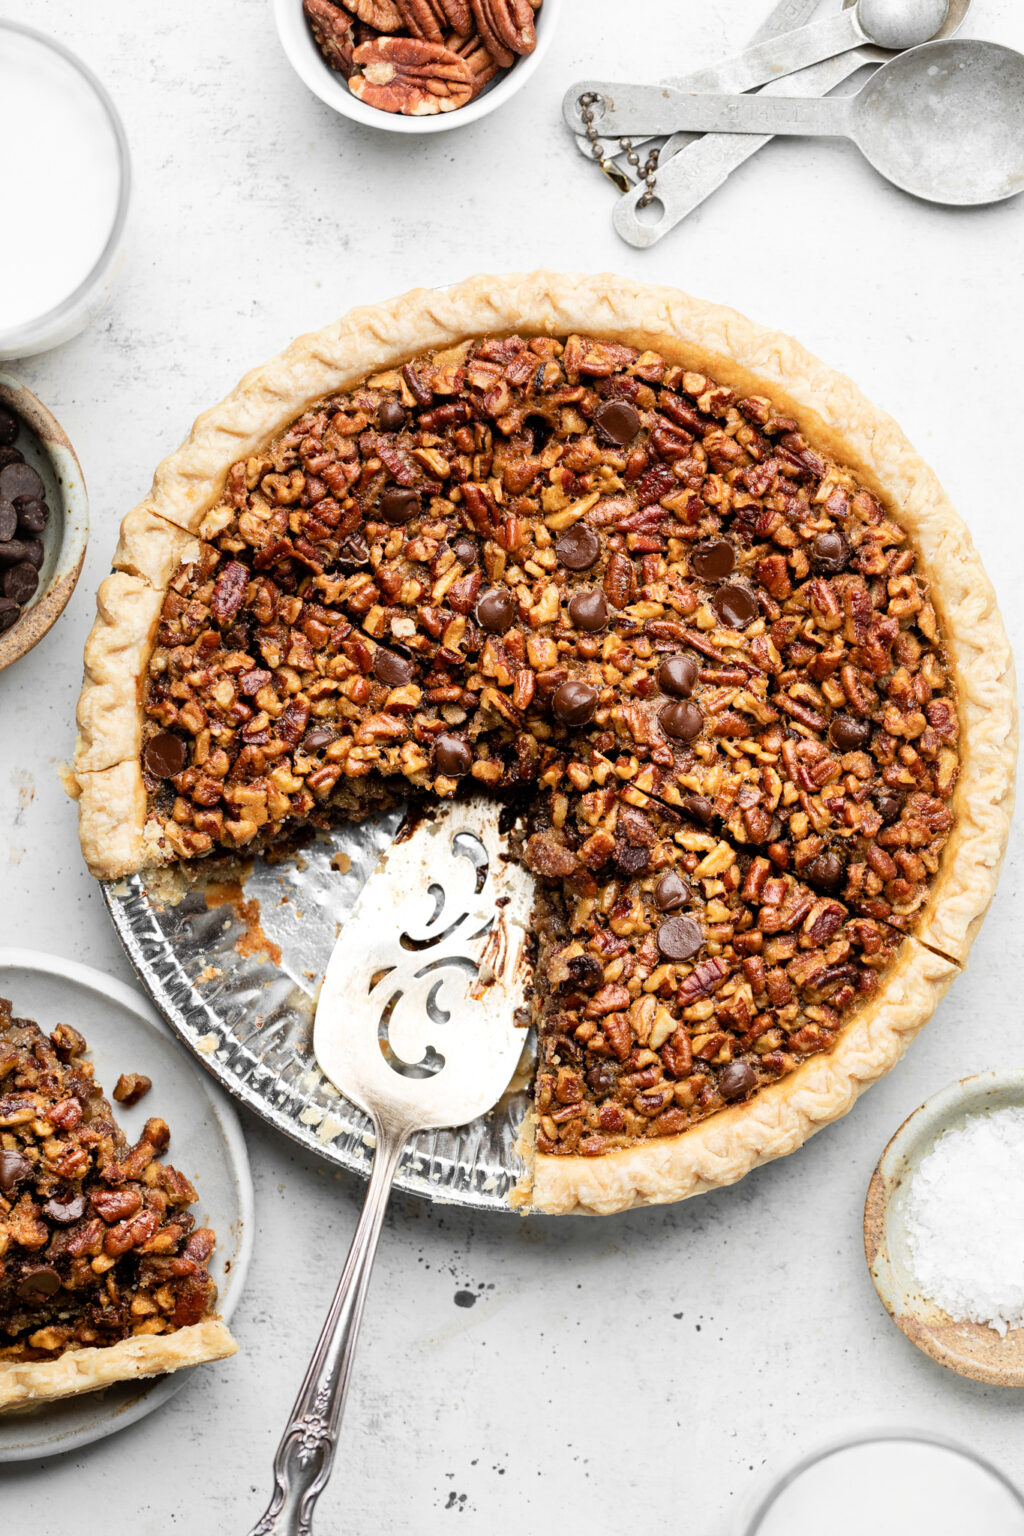 Gooey Chocolate Pecan Pie - All the Healthy Things